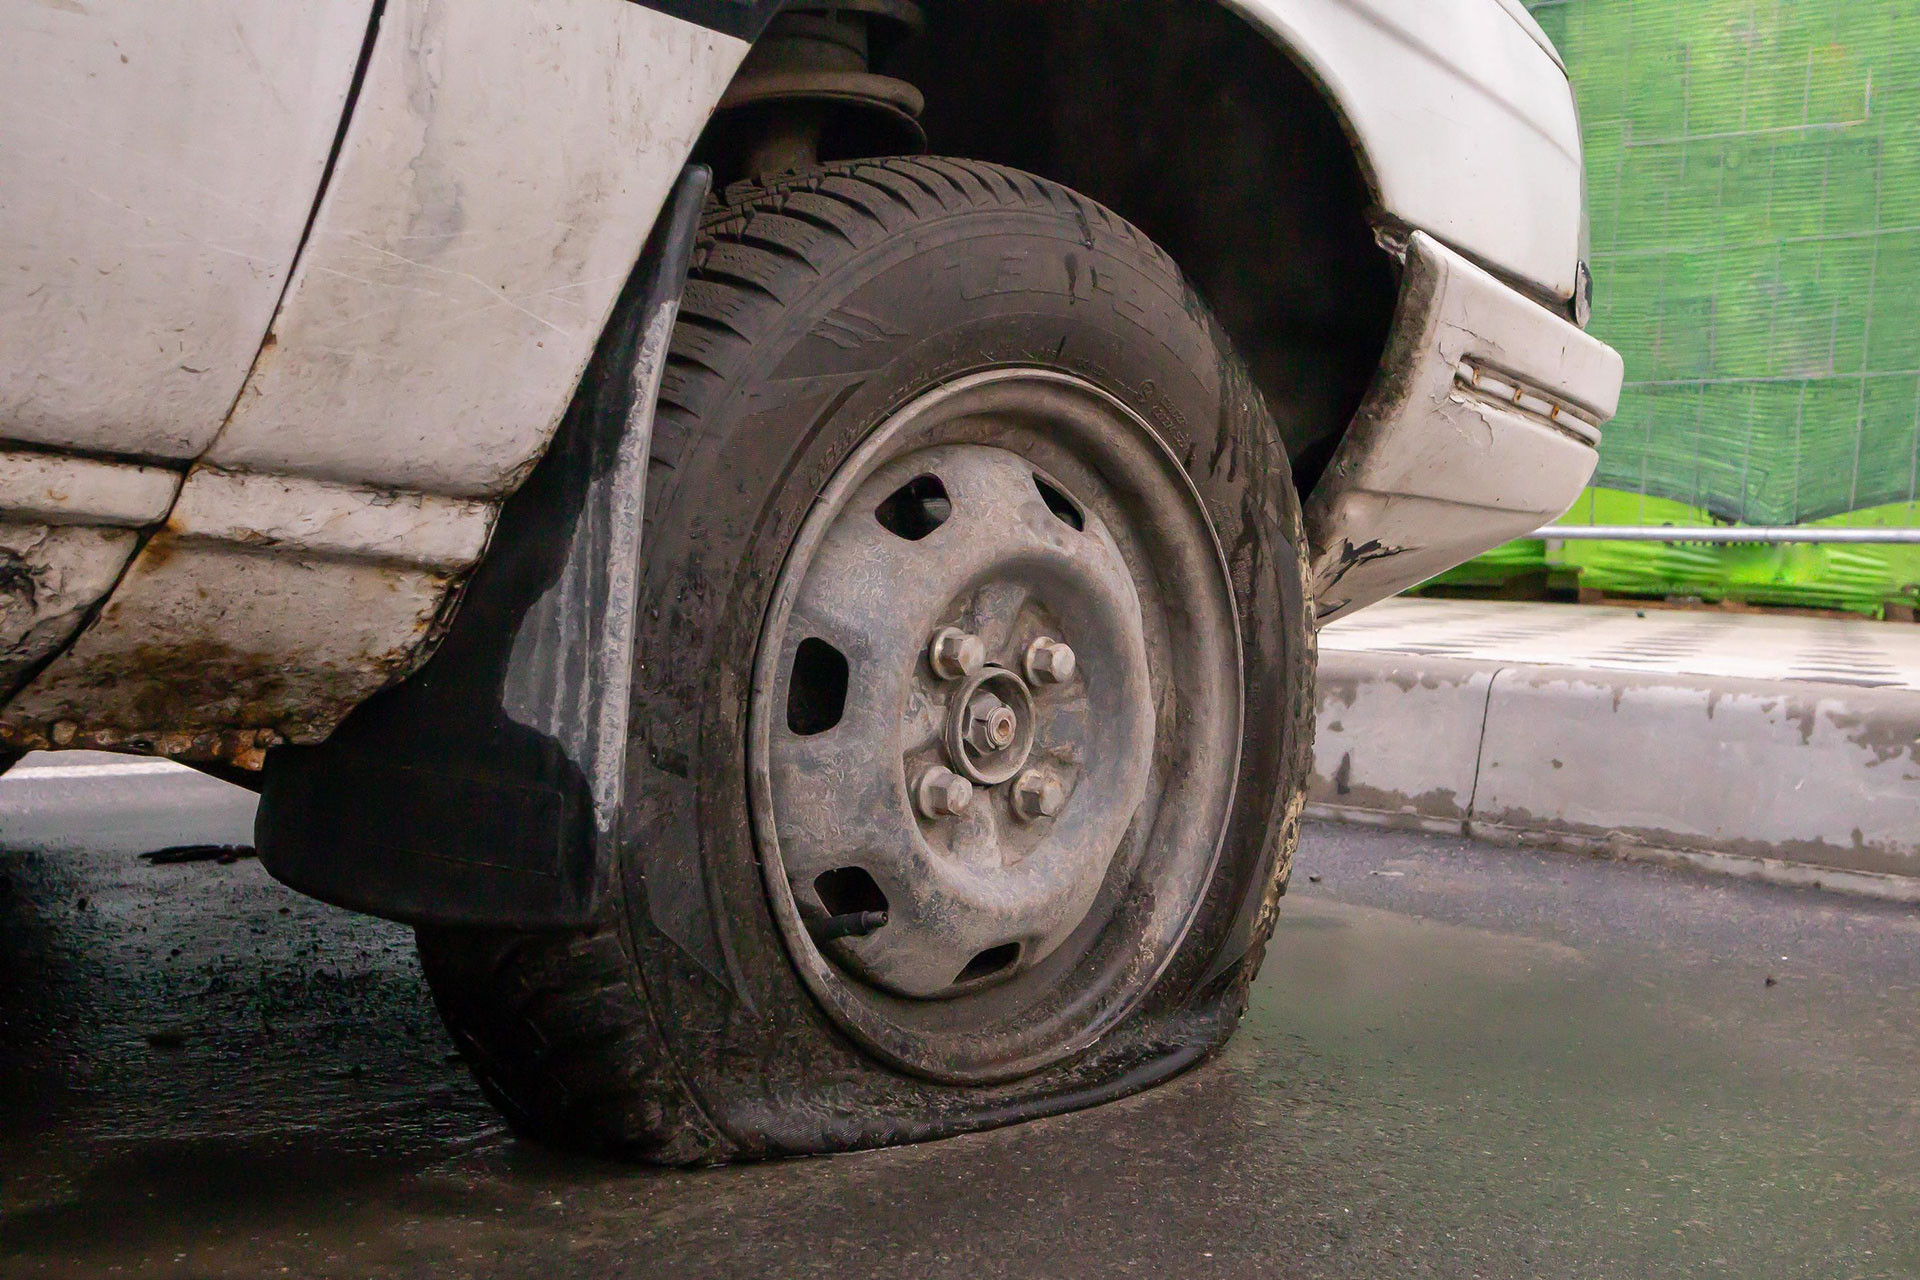 abandoned old broken car with flat wheels a tire with a flat tire the concept of accident breakdown repair insurance a flat tire on a car wheel ukraine kiev august 19 2021 free photo.jpg